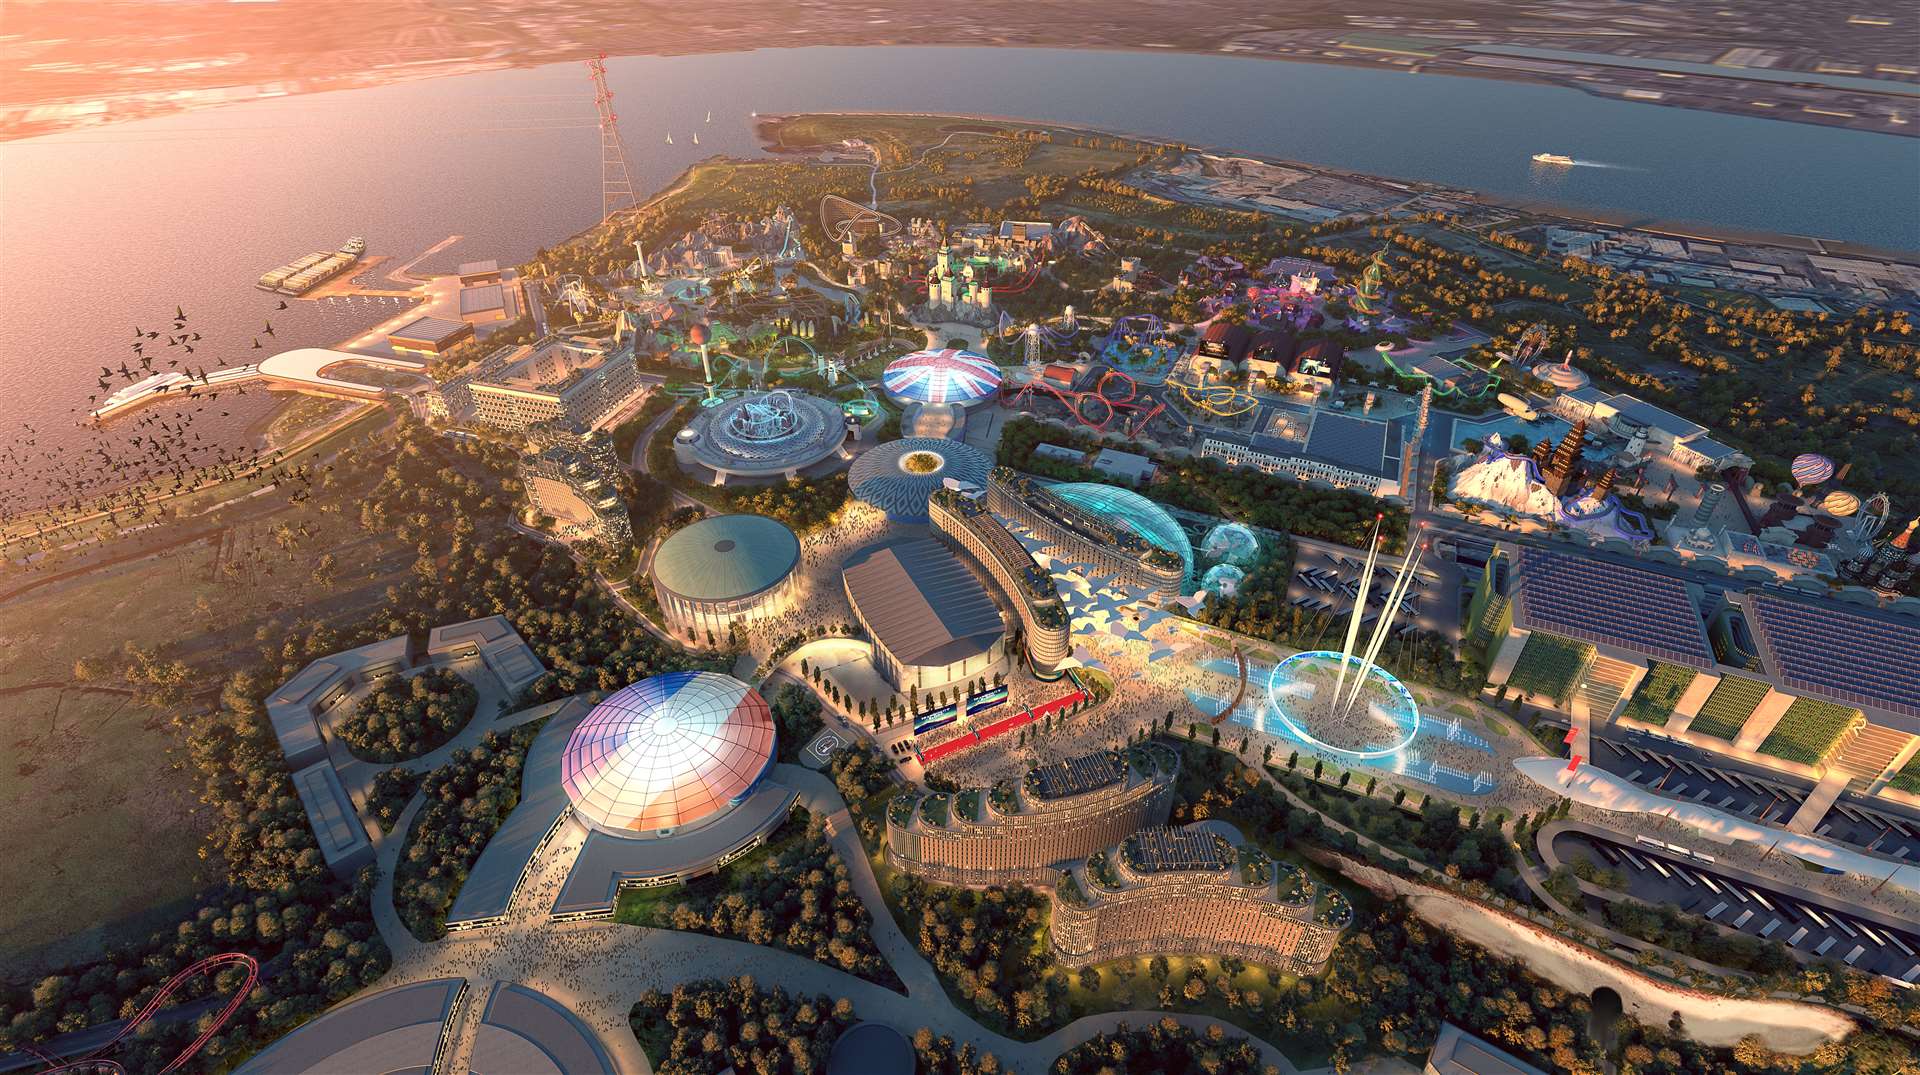 A new detailed impression of what the London Resort theme park will look like if permission is granted